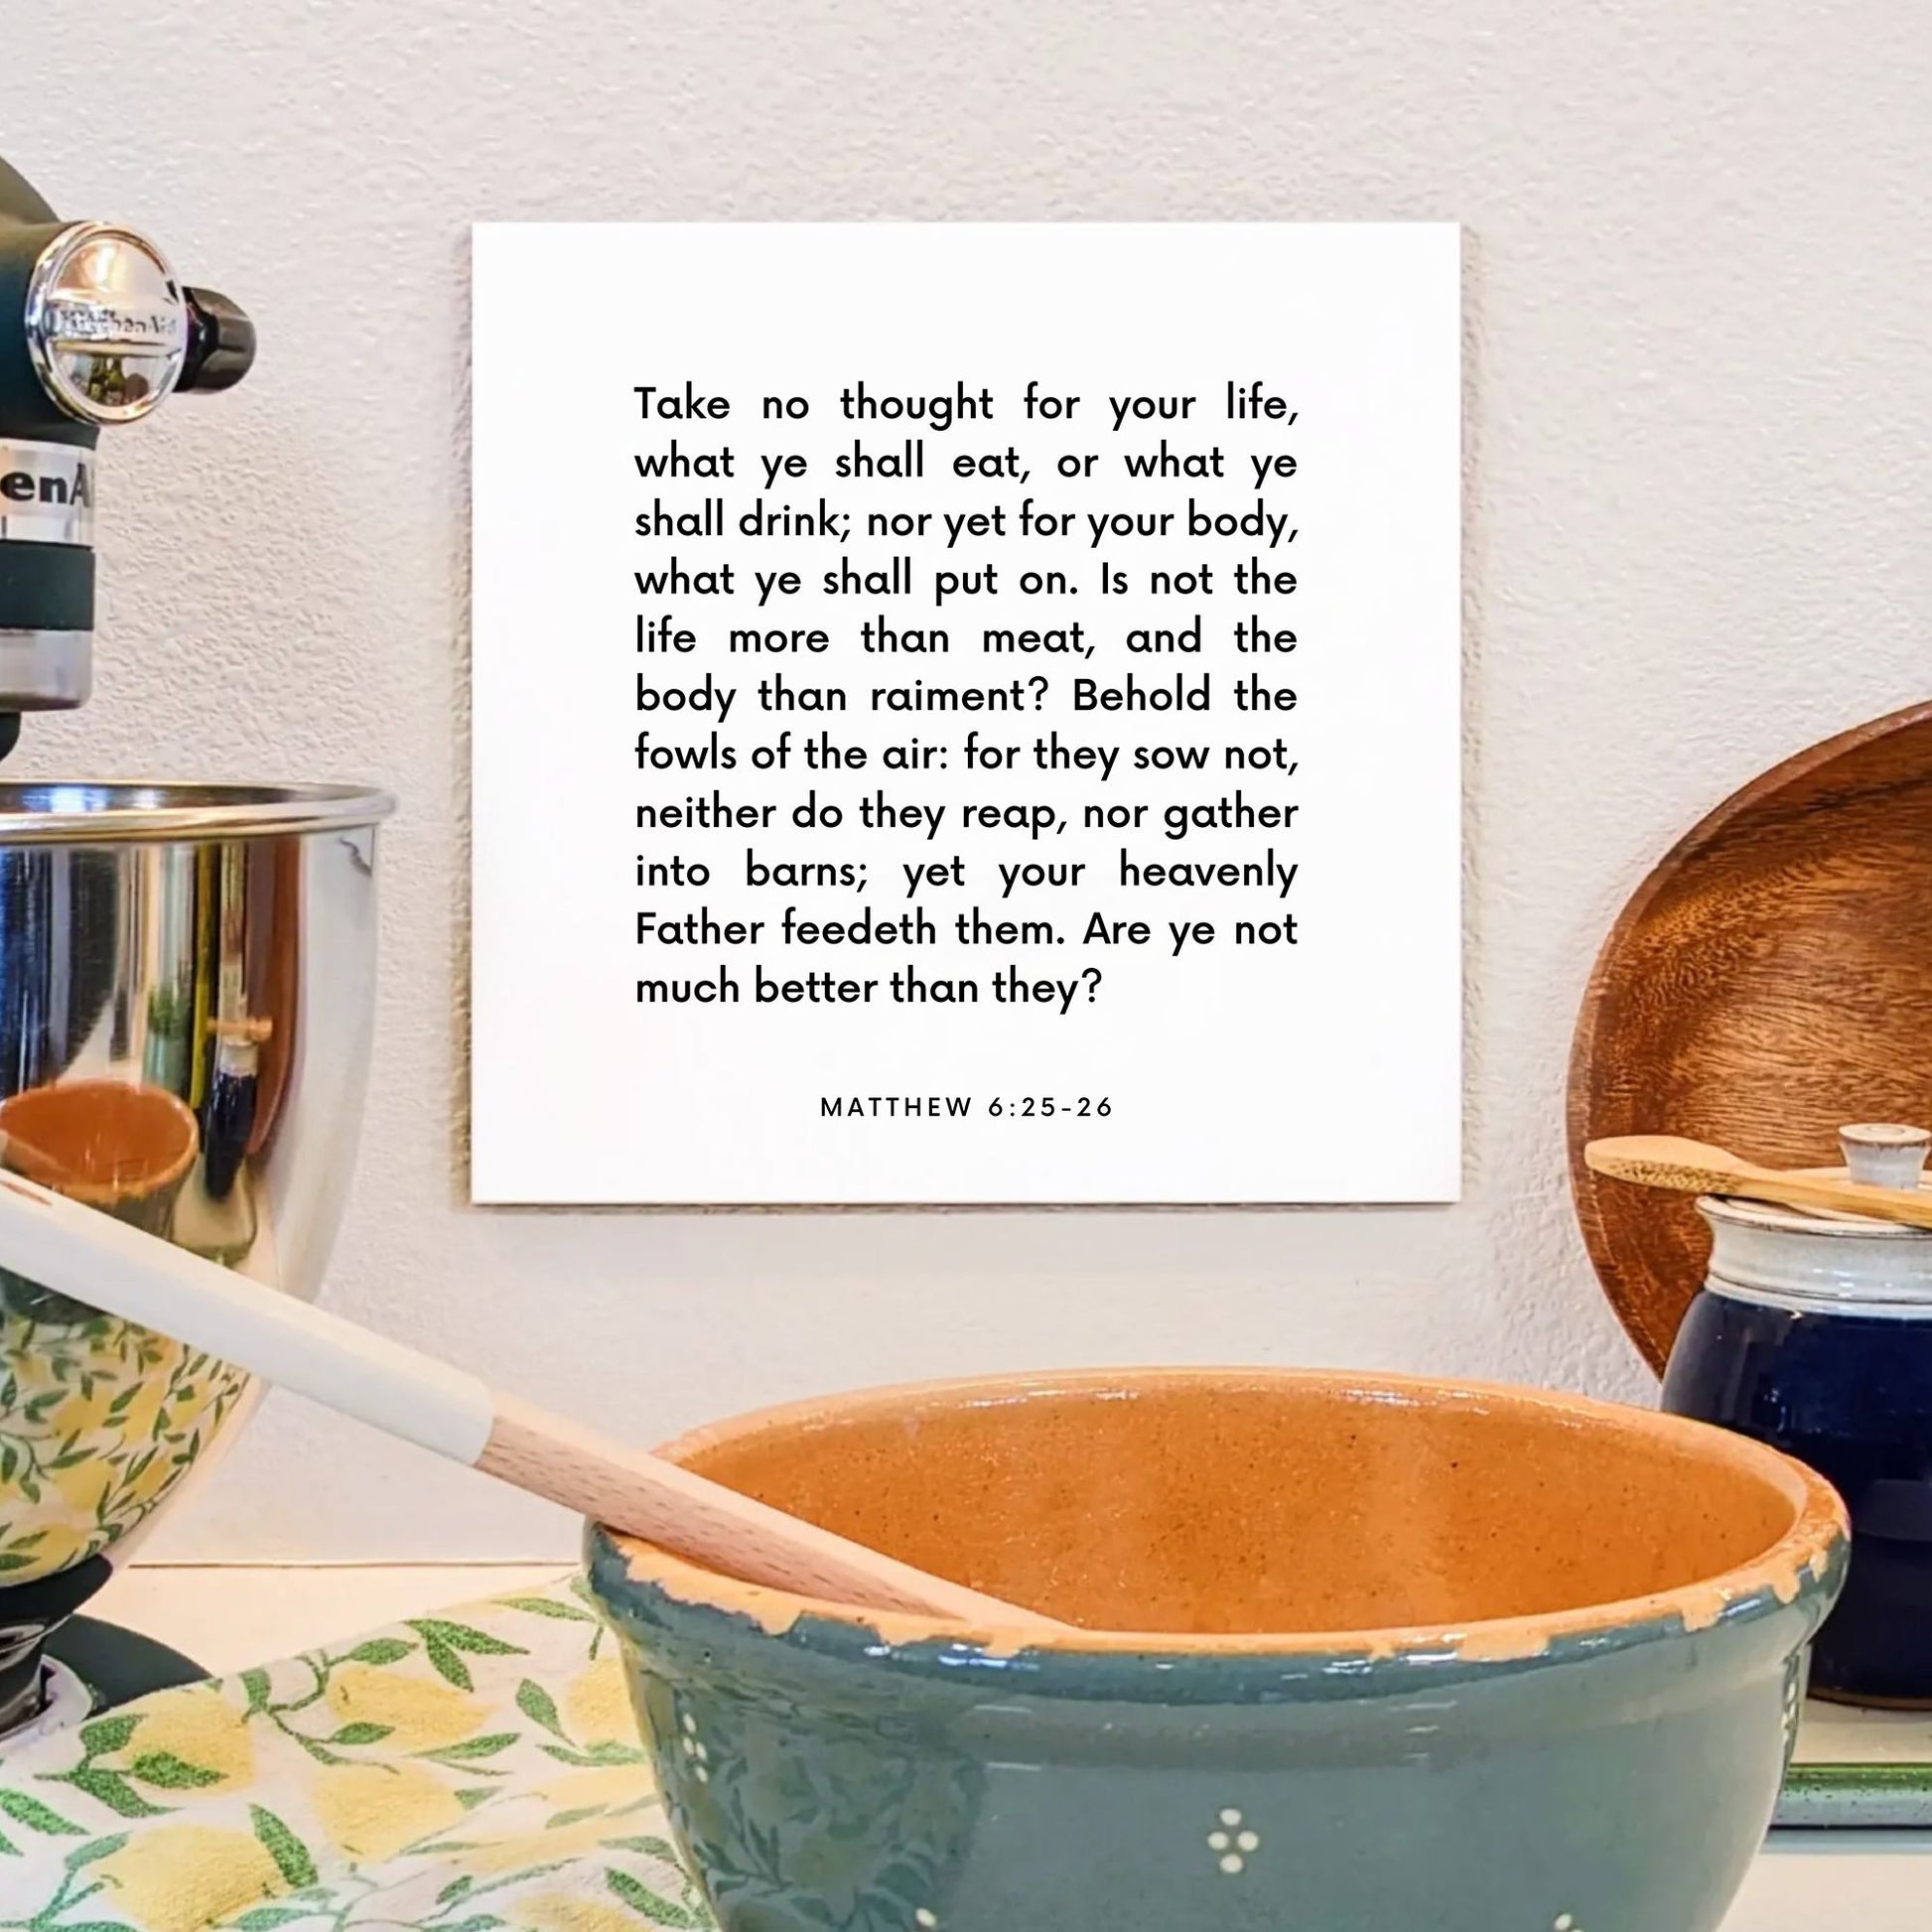 Kitchen mouting of the scripture tile for Matthew 6:25-26 - "Take no thought for your life, what ye shall eat"